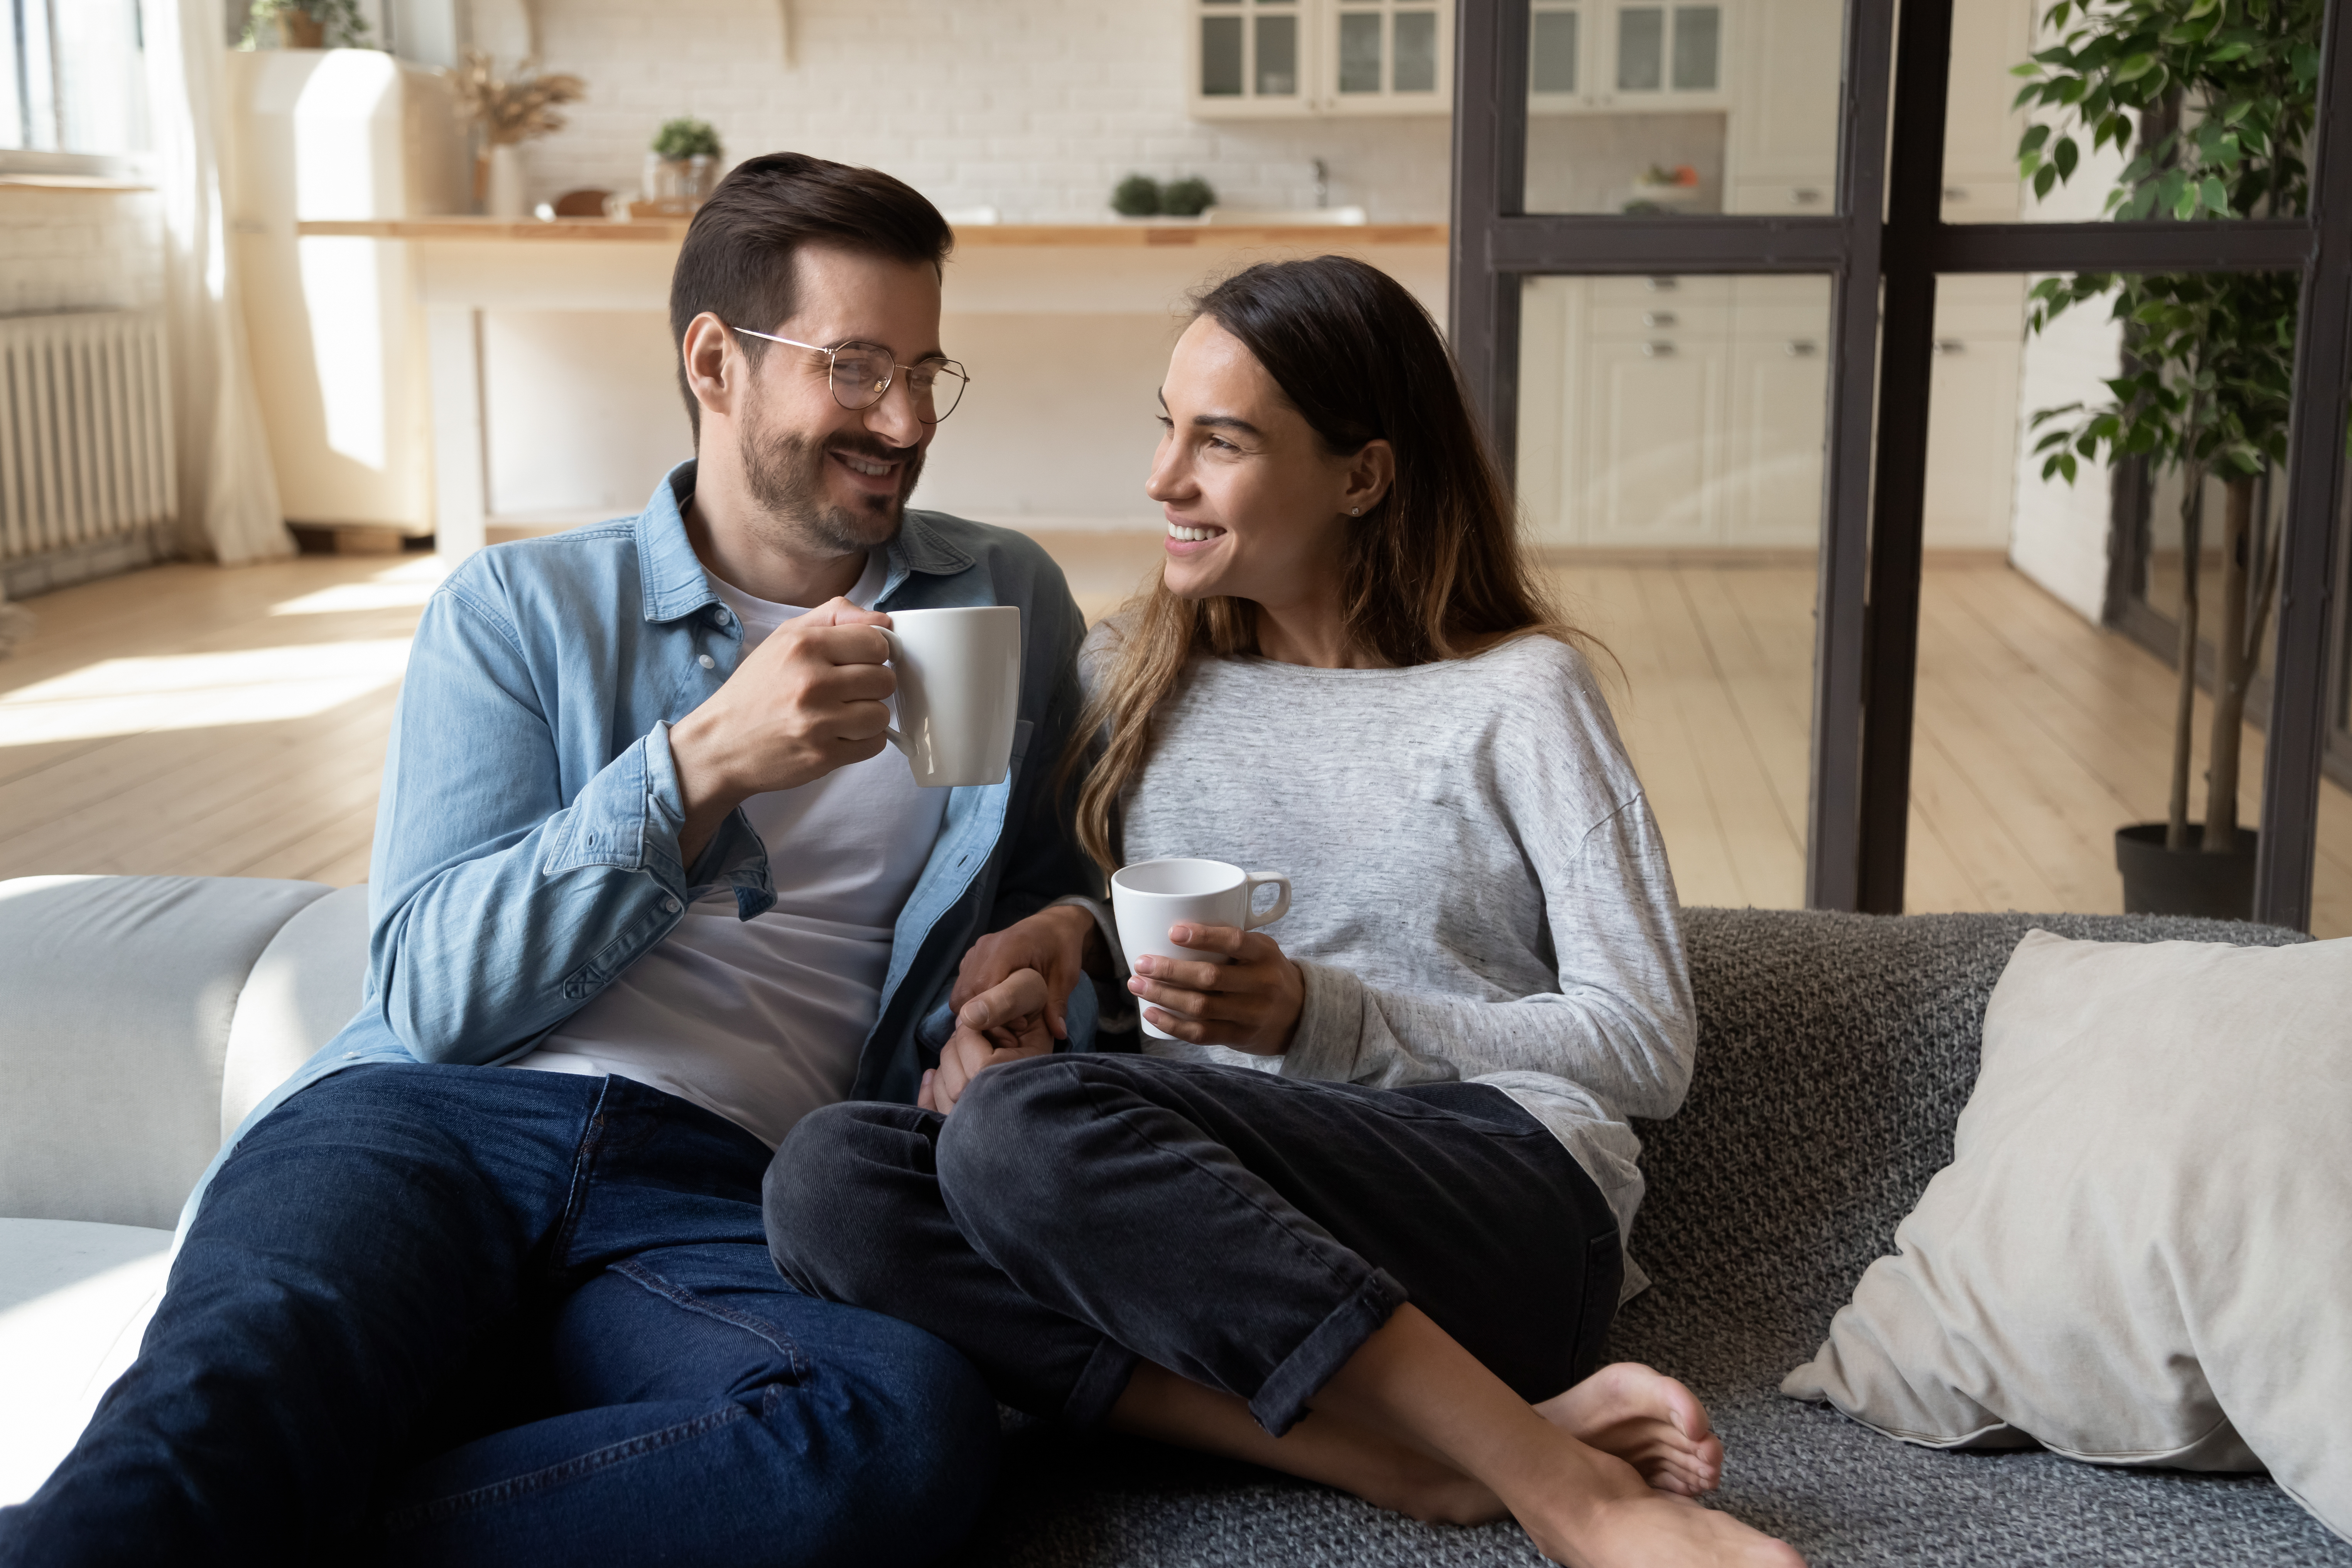 A happy couple drinking tea and relaxing at home | Source: Shutterstock